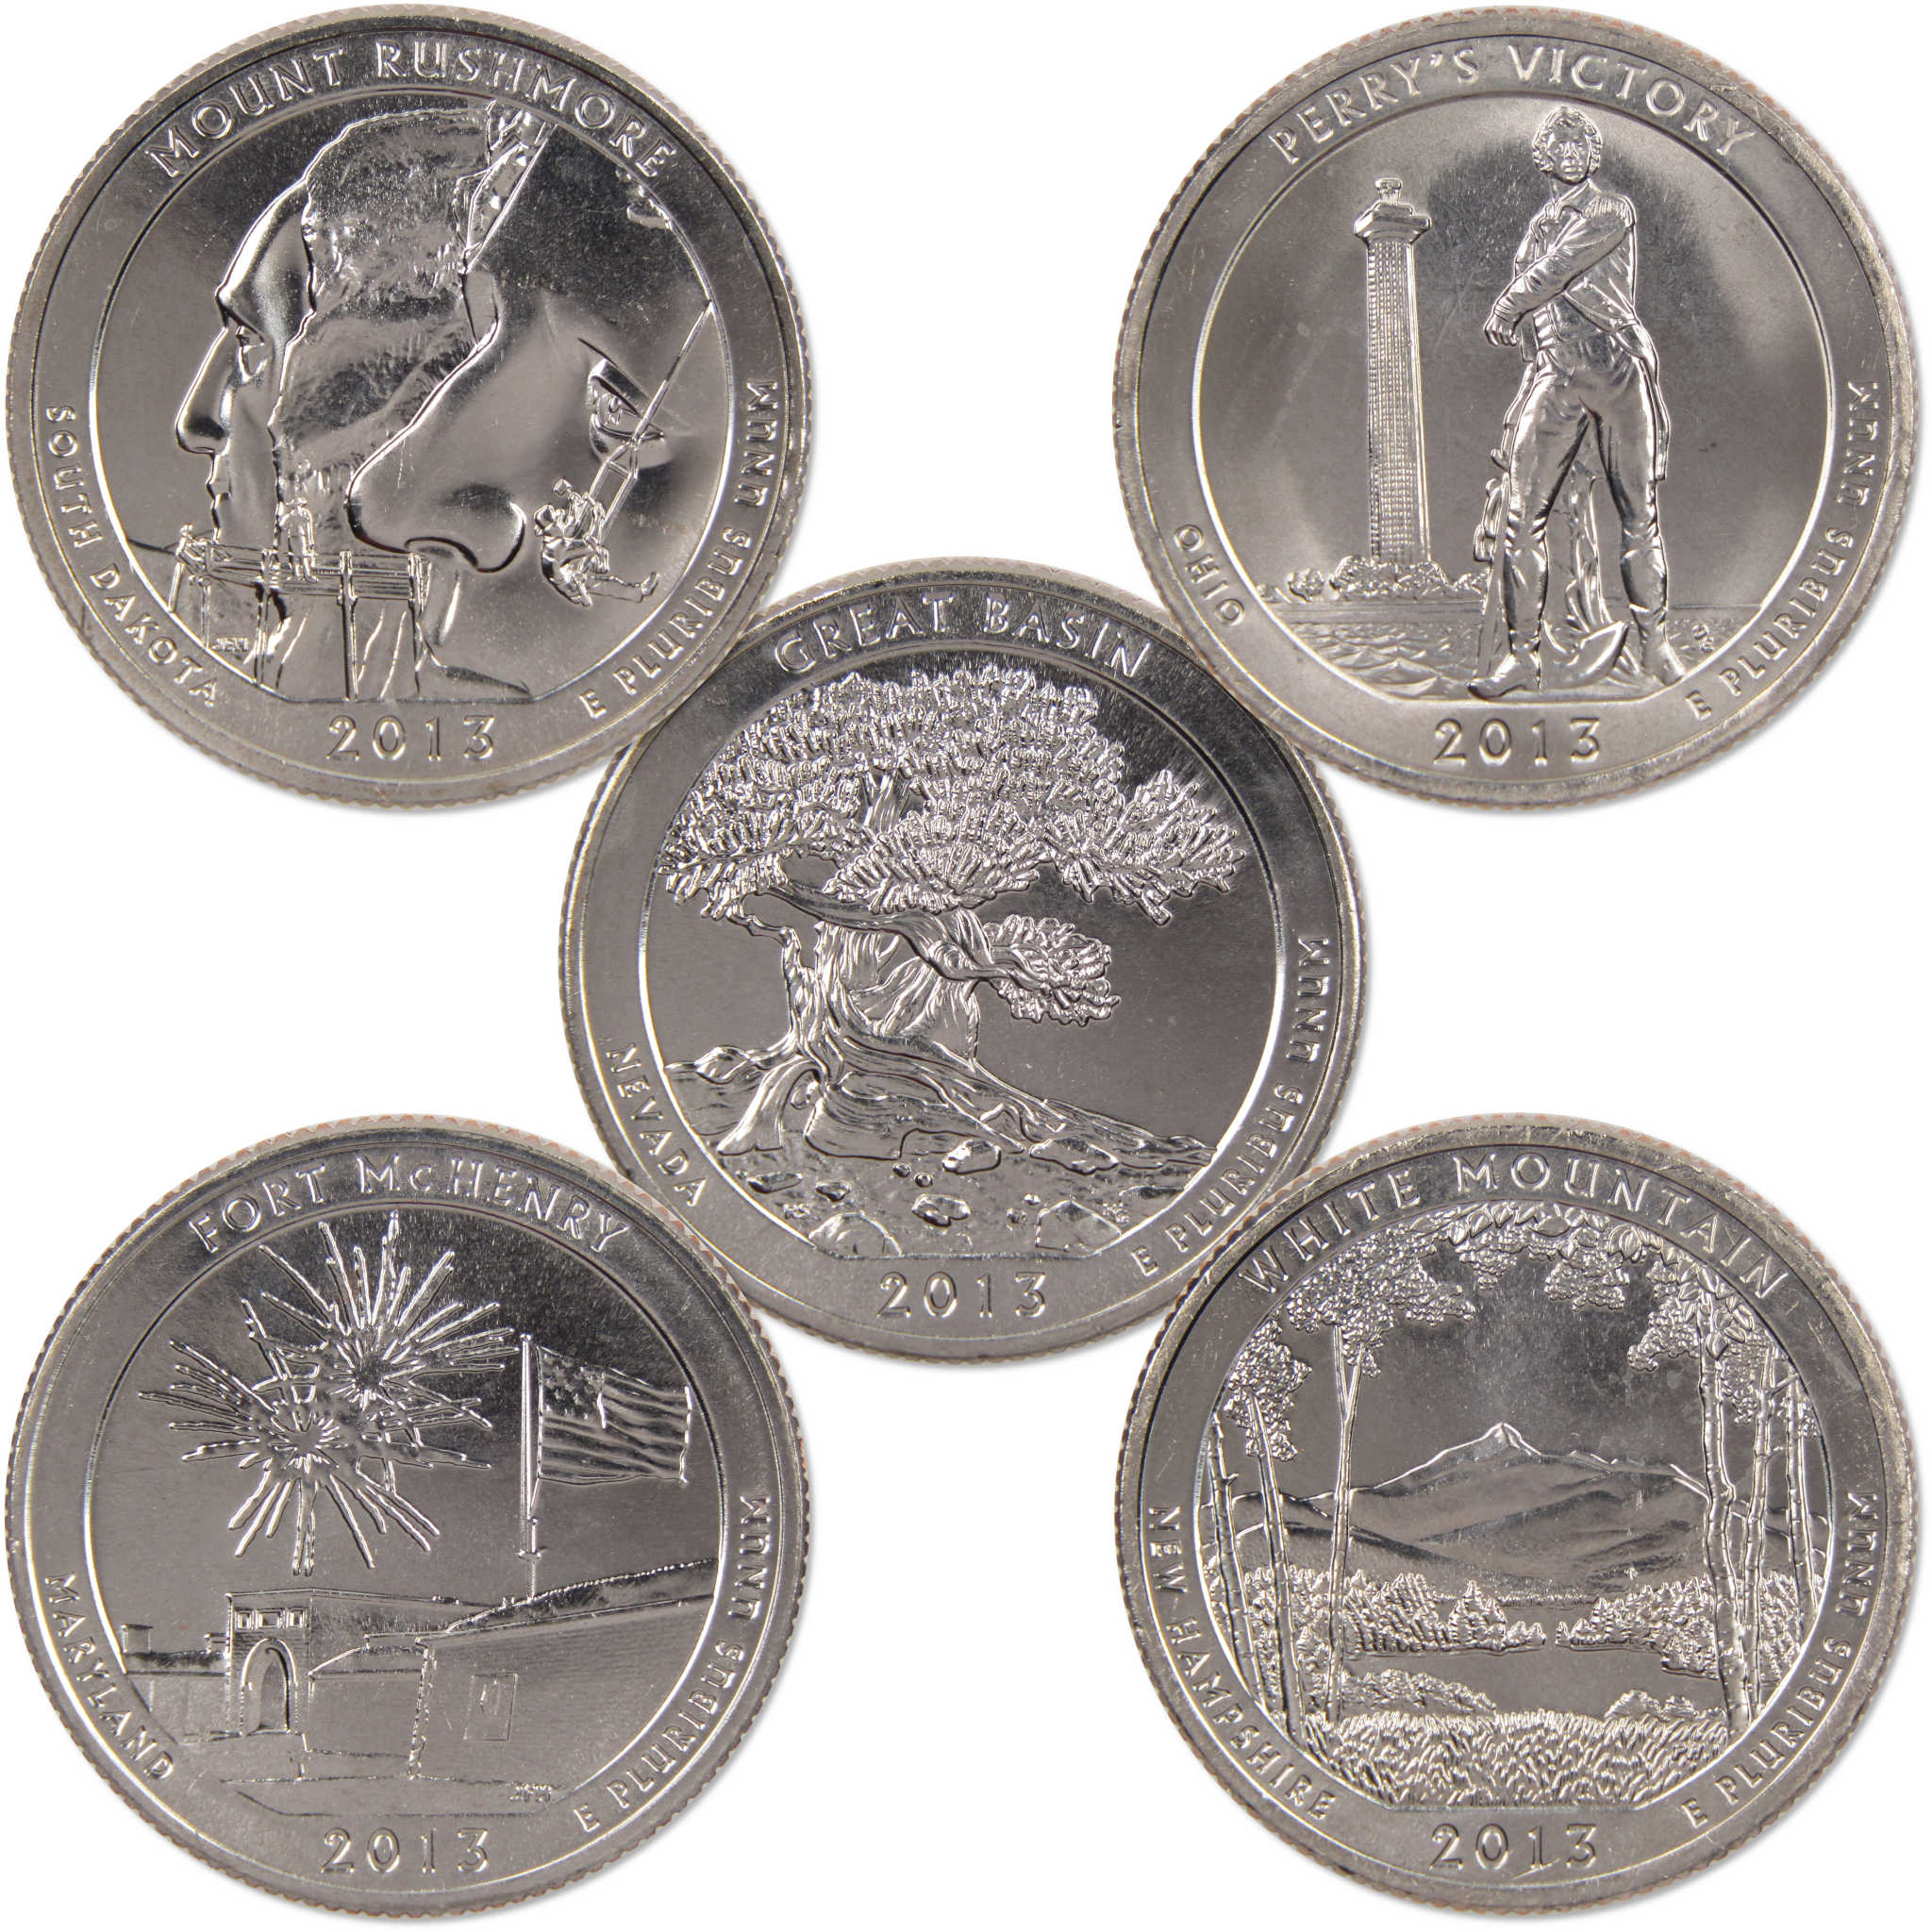 2013 S National Park Quarter 5 Coin Set Uncirculated Mint State Clad 25c